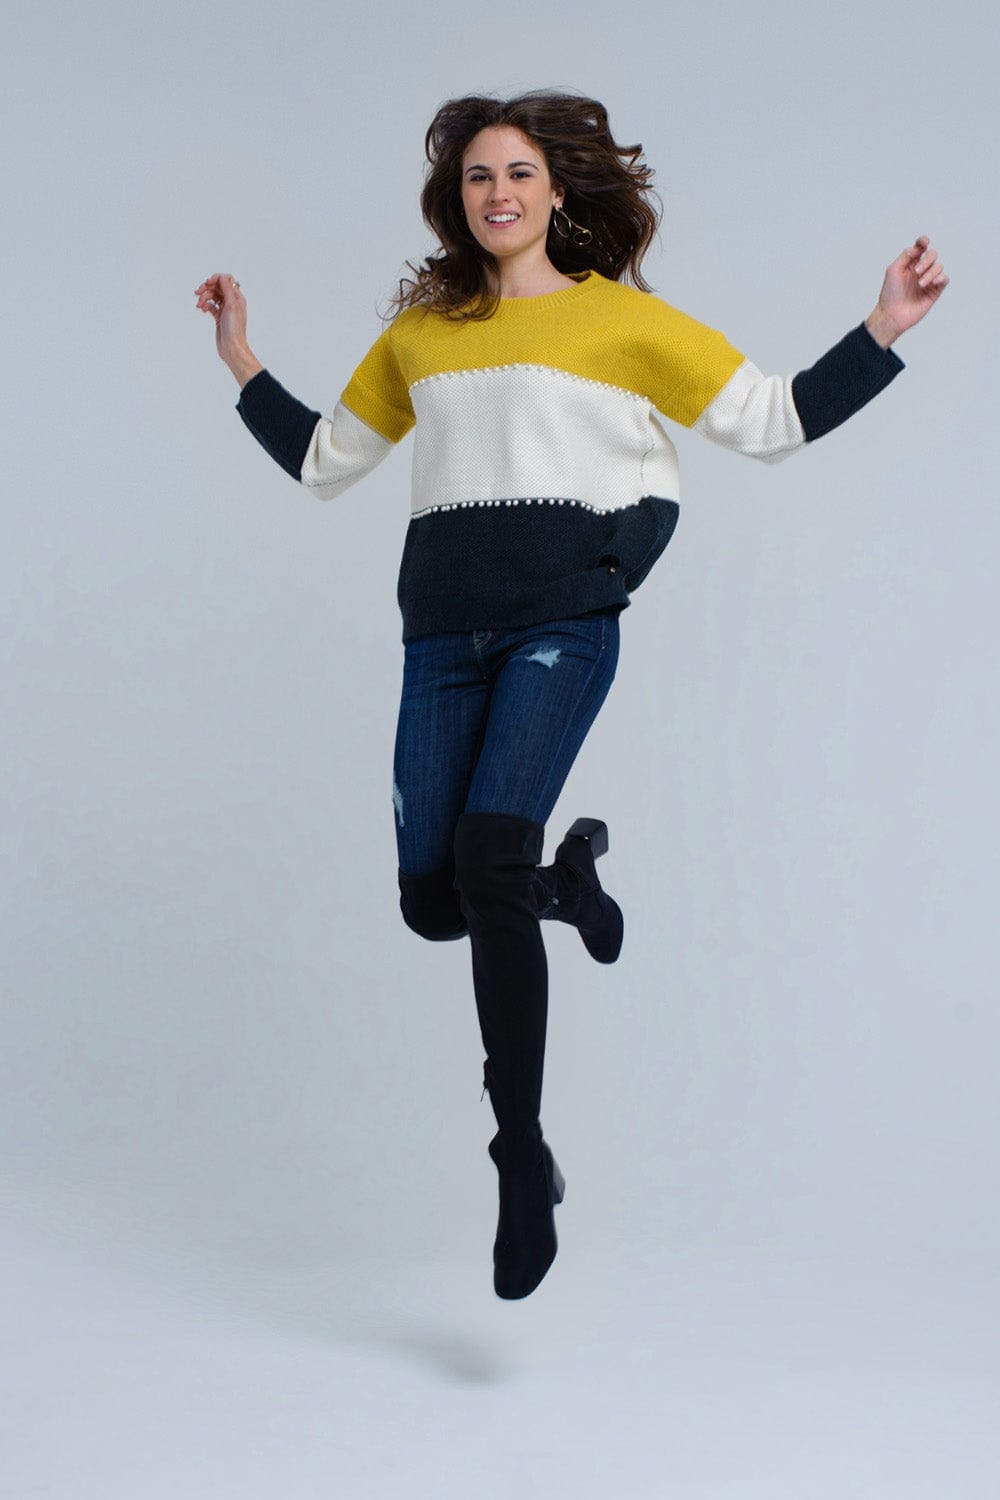 Q2 Women's Sweater Yellow knitted sweater with pearls